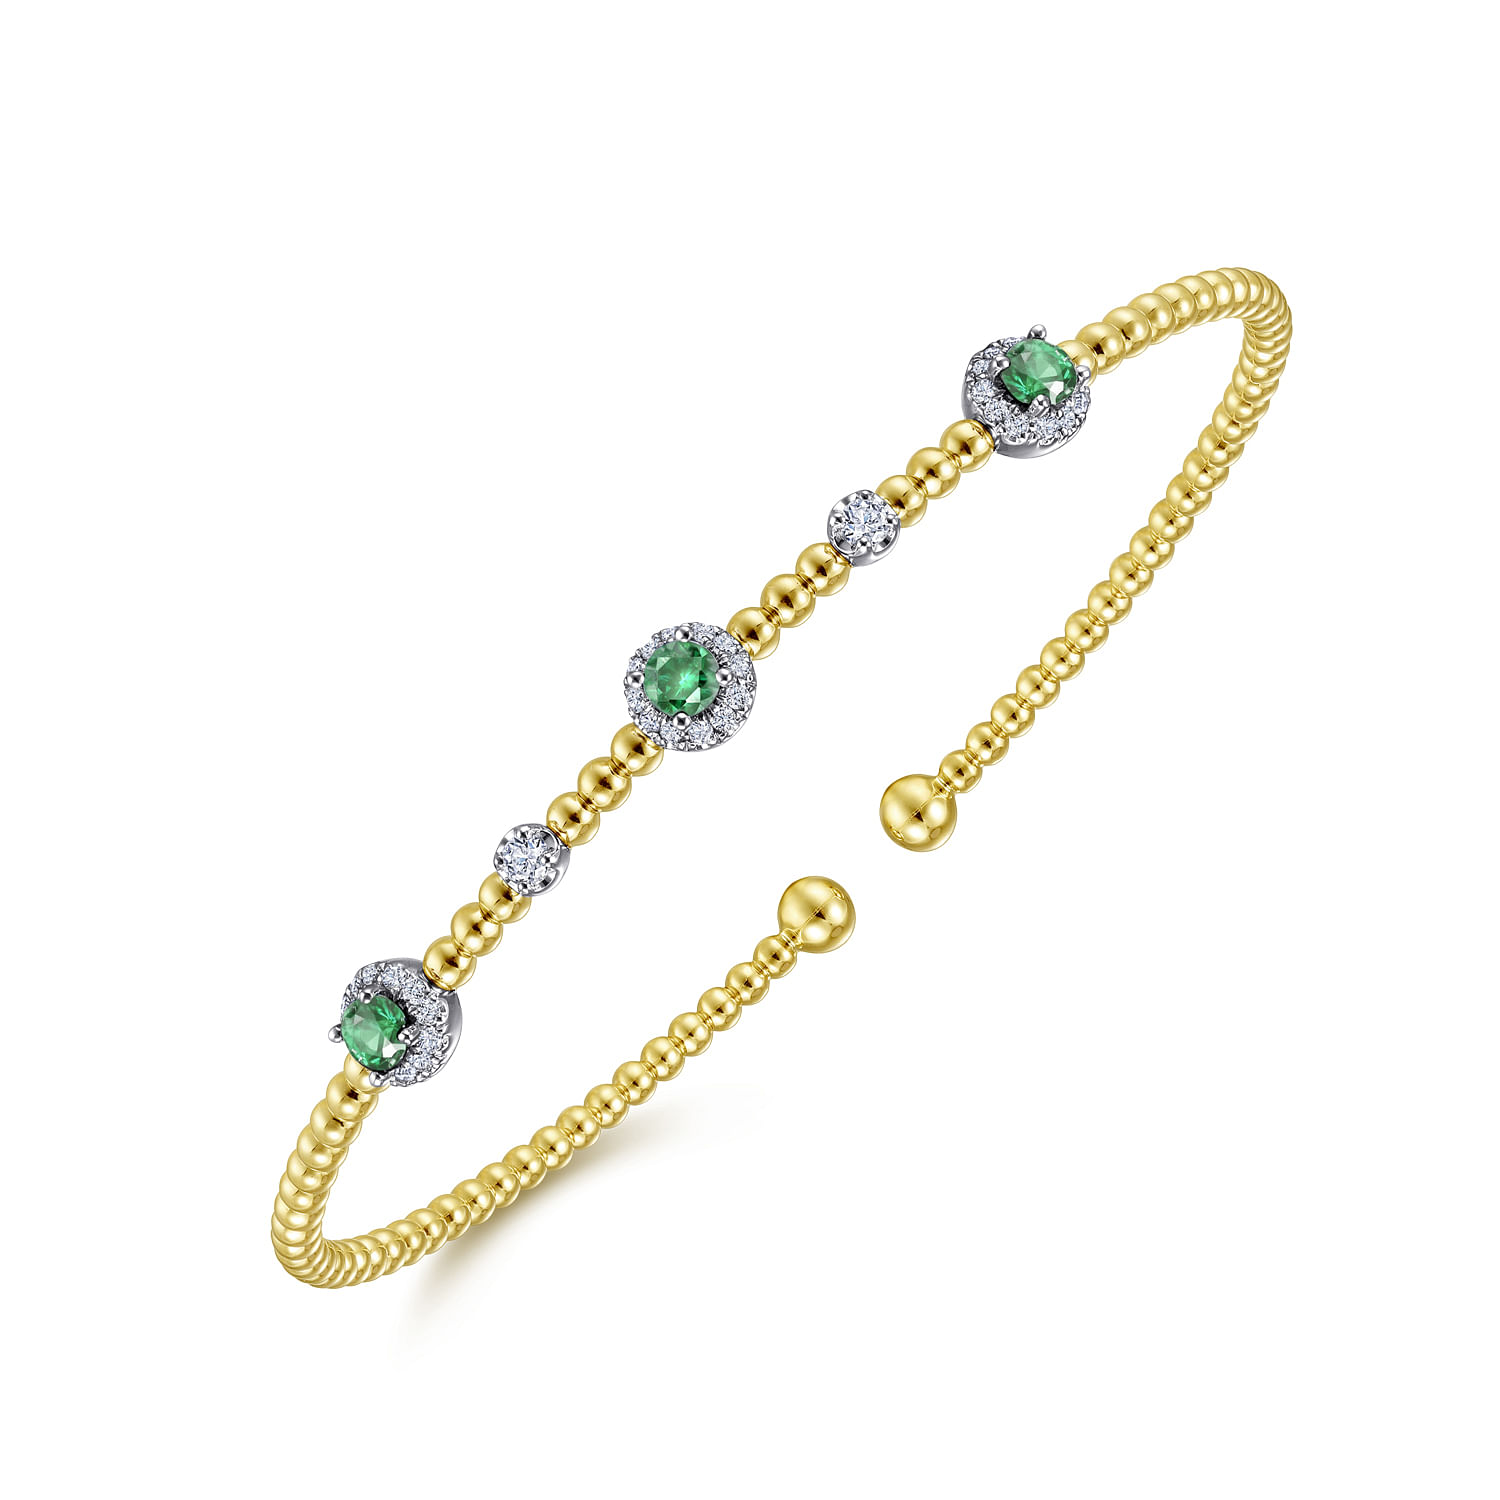 14K White-Yellow Gold Bujukan Bead Cuff Bracelet with Emerald and Diamond Halo Stations